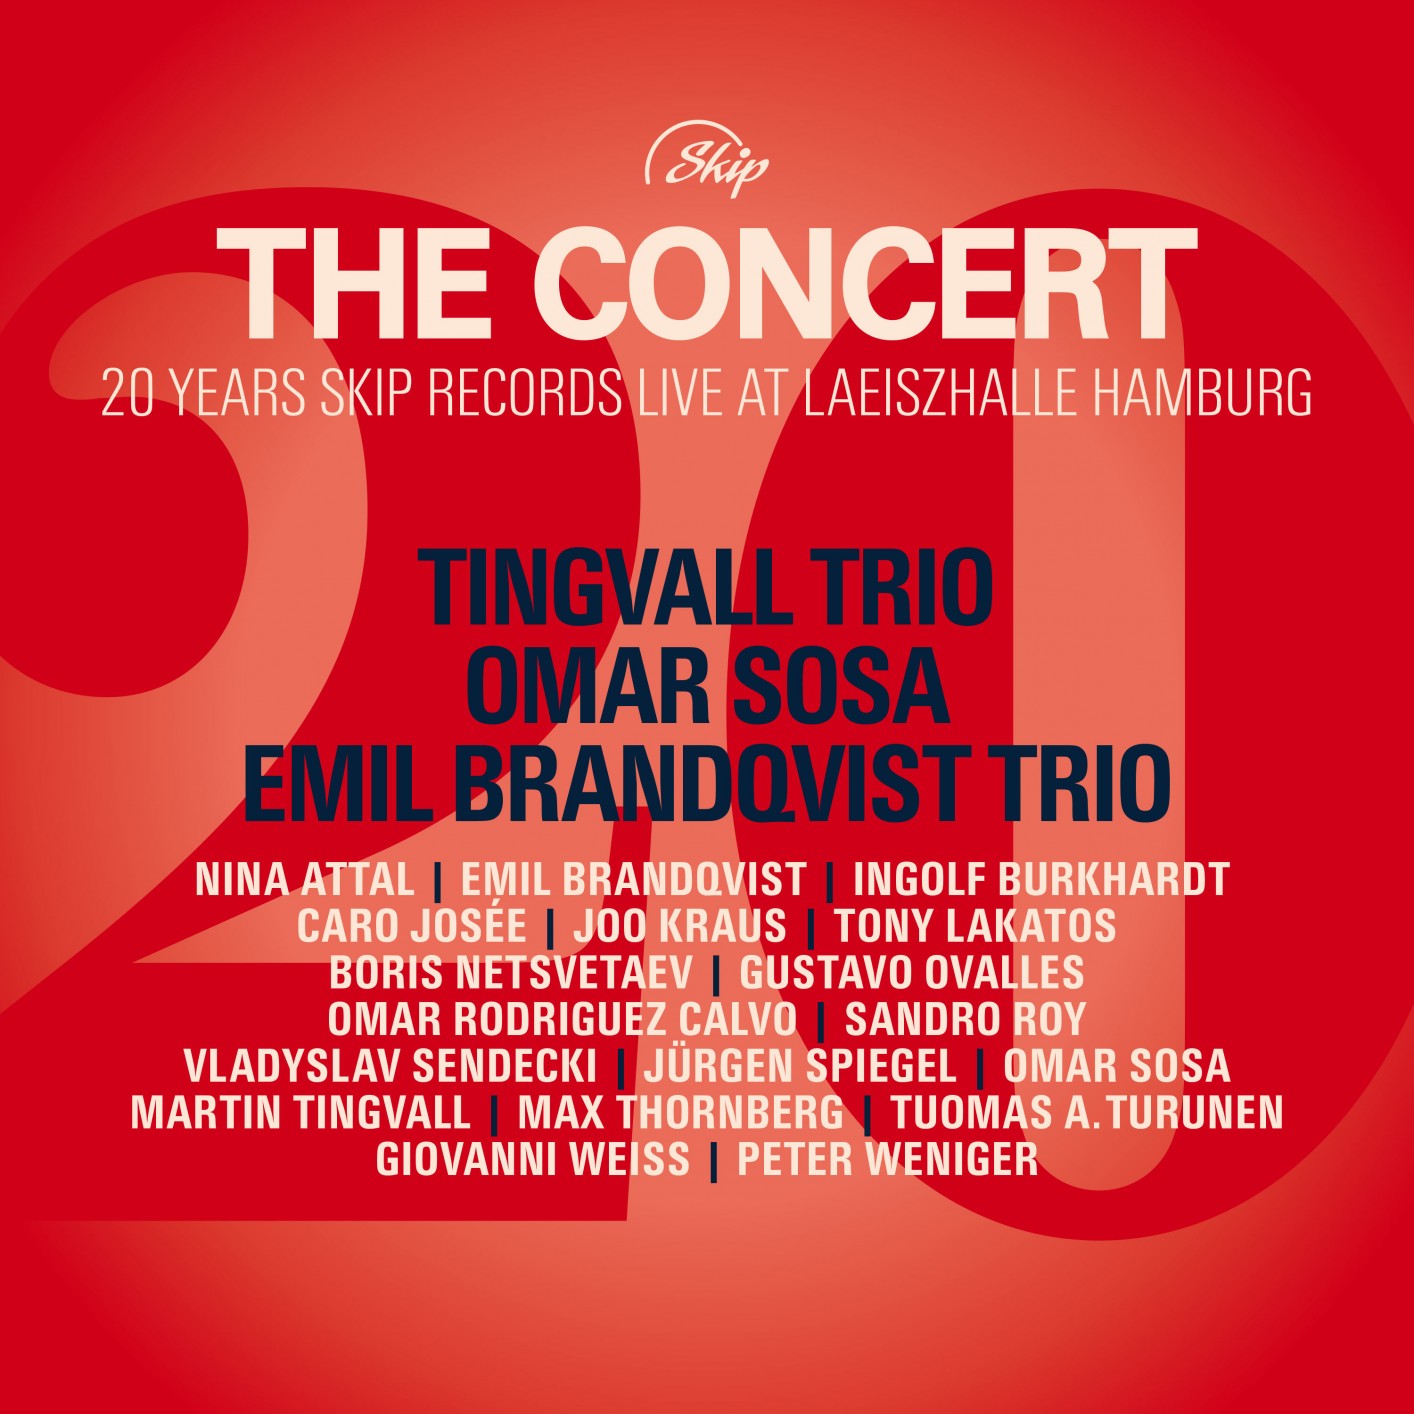 Various Artists -  The Concert (20 Years Skip Records Live at Laeiszhalle Hamburg) (2020) [FLAC 24bit/96kHz]